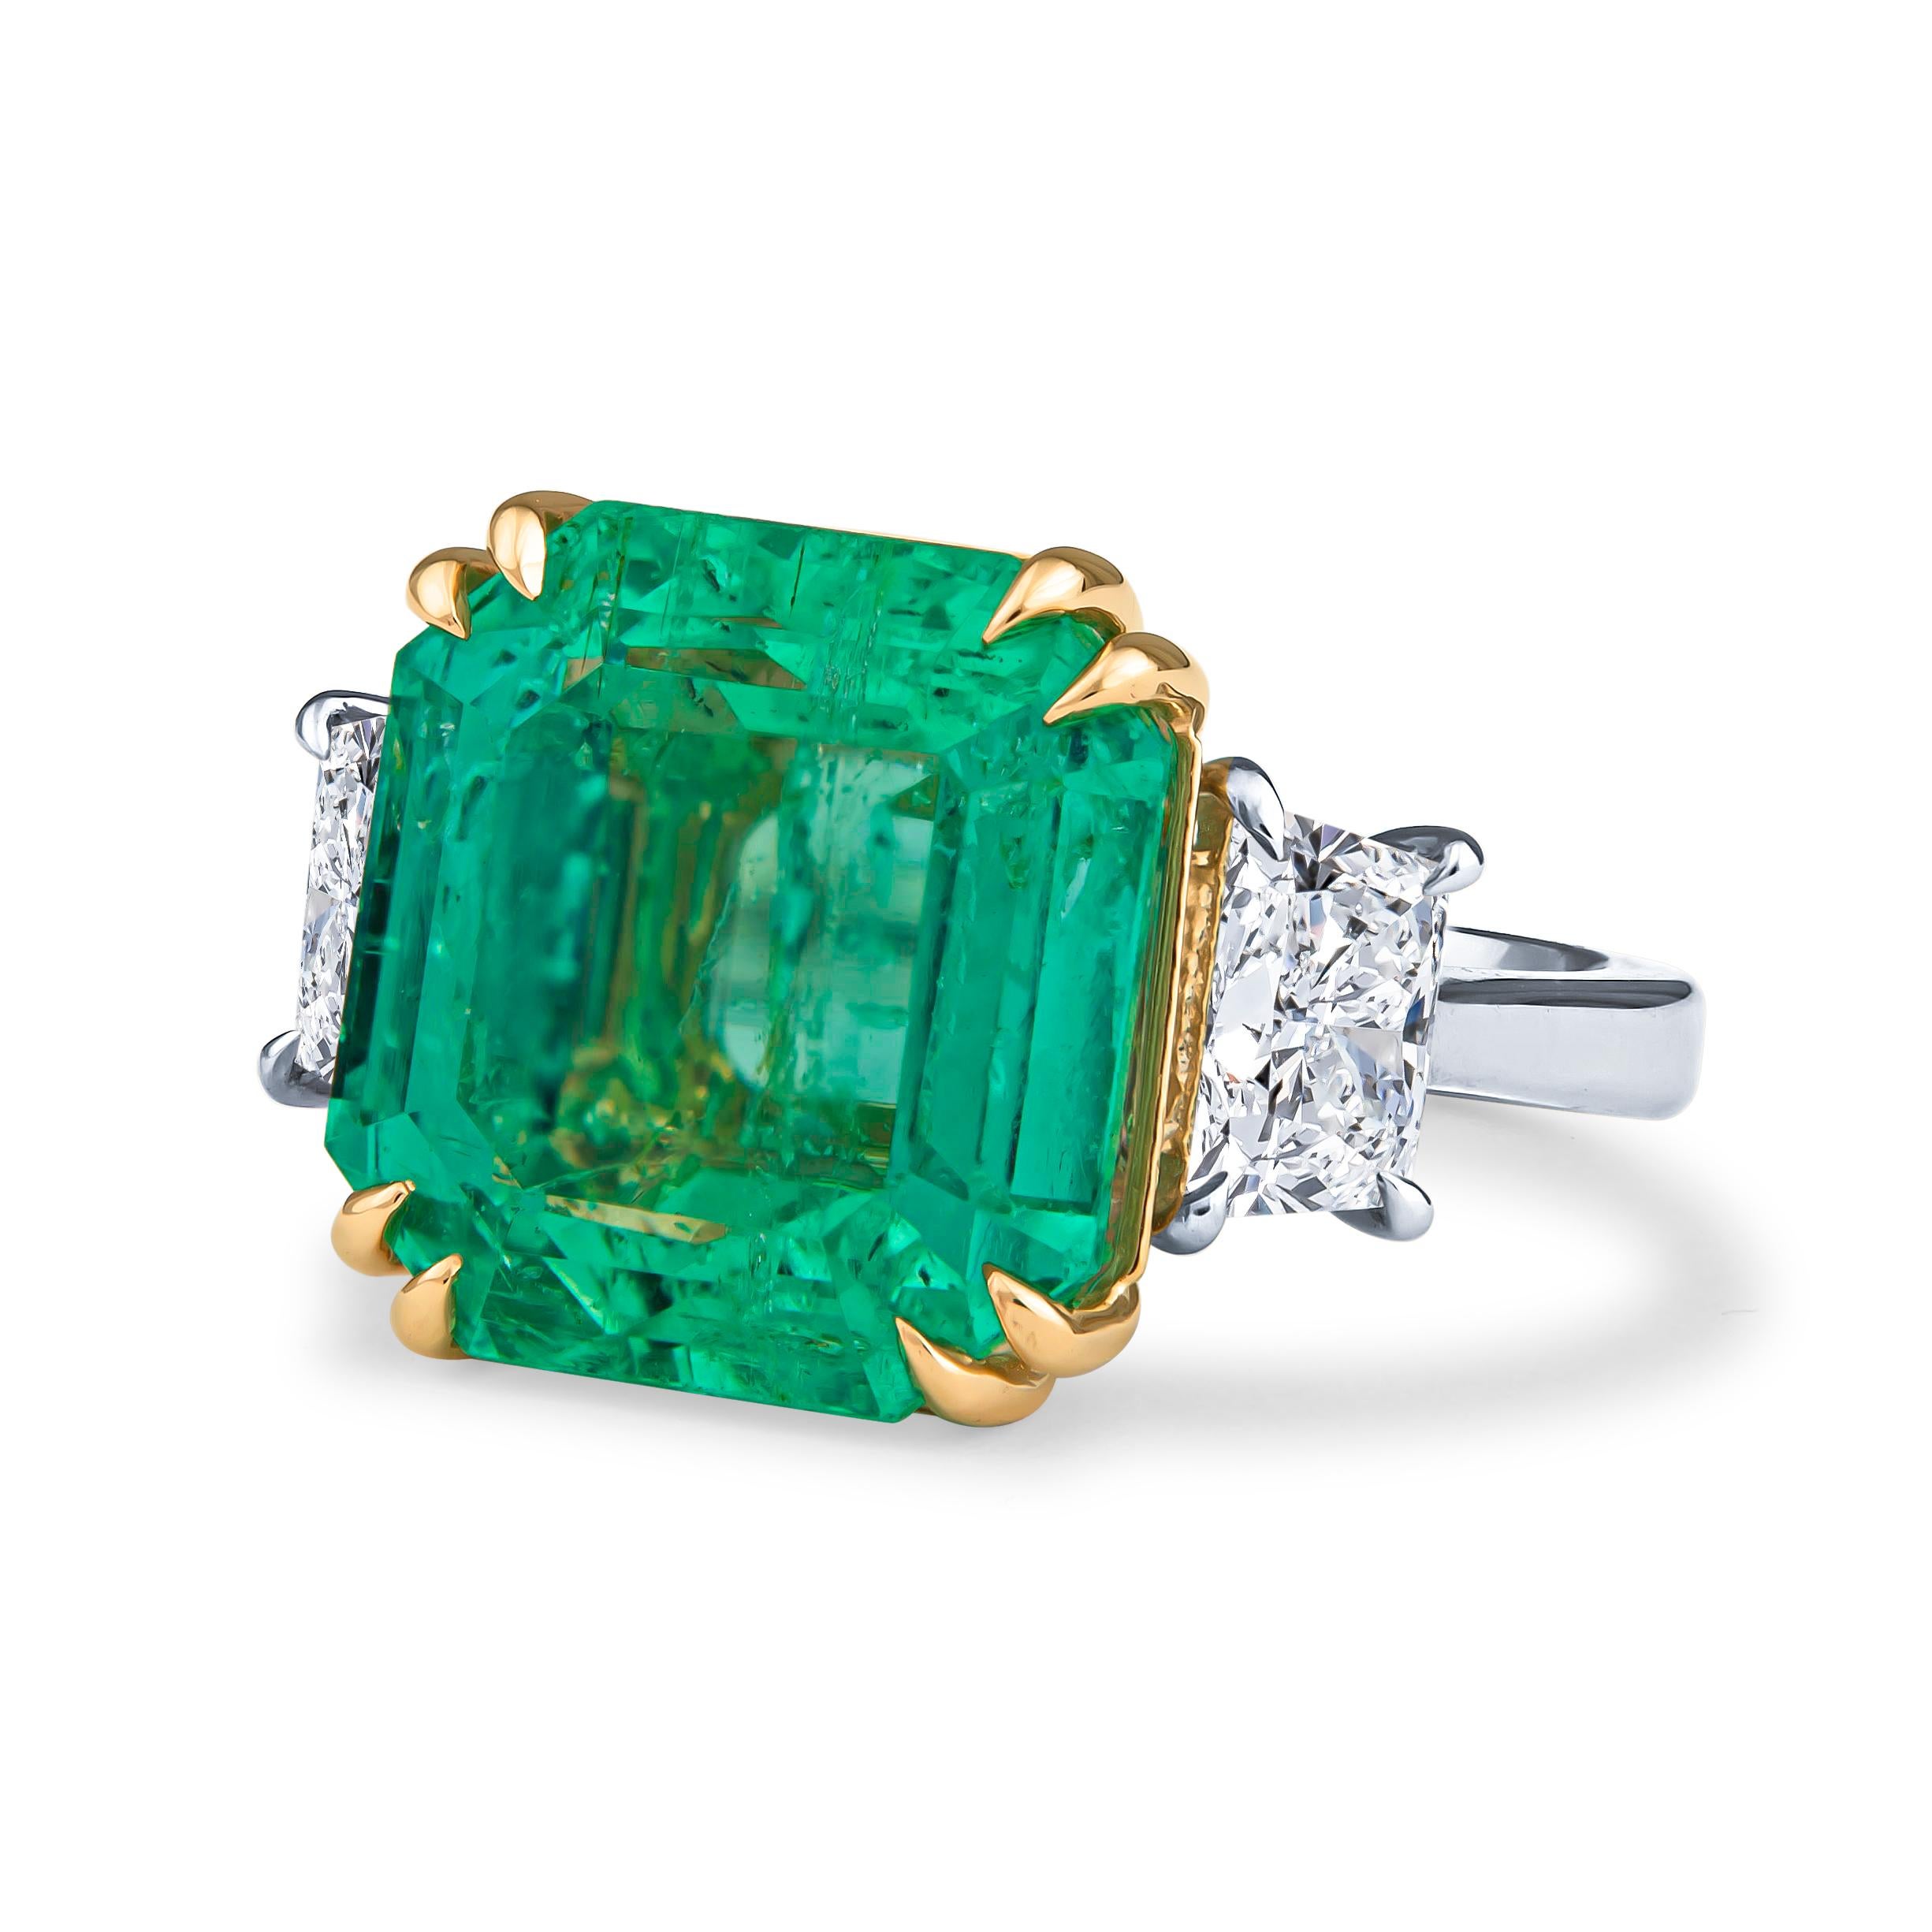 This jaw-dropping 12.65ct natural Colombian emerald is a square step cut, GIA certified gem (GIA 2201417901, F2 clarity). It is set in a platinum ring with two 0.88ct total weight trapezoid diamonds and an 18kt yellow gold double prong basket